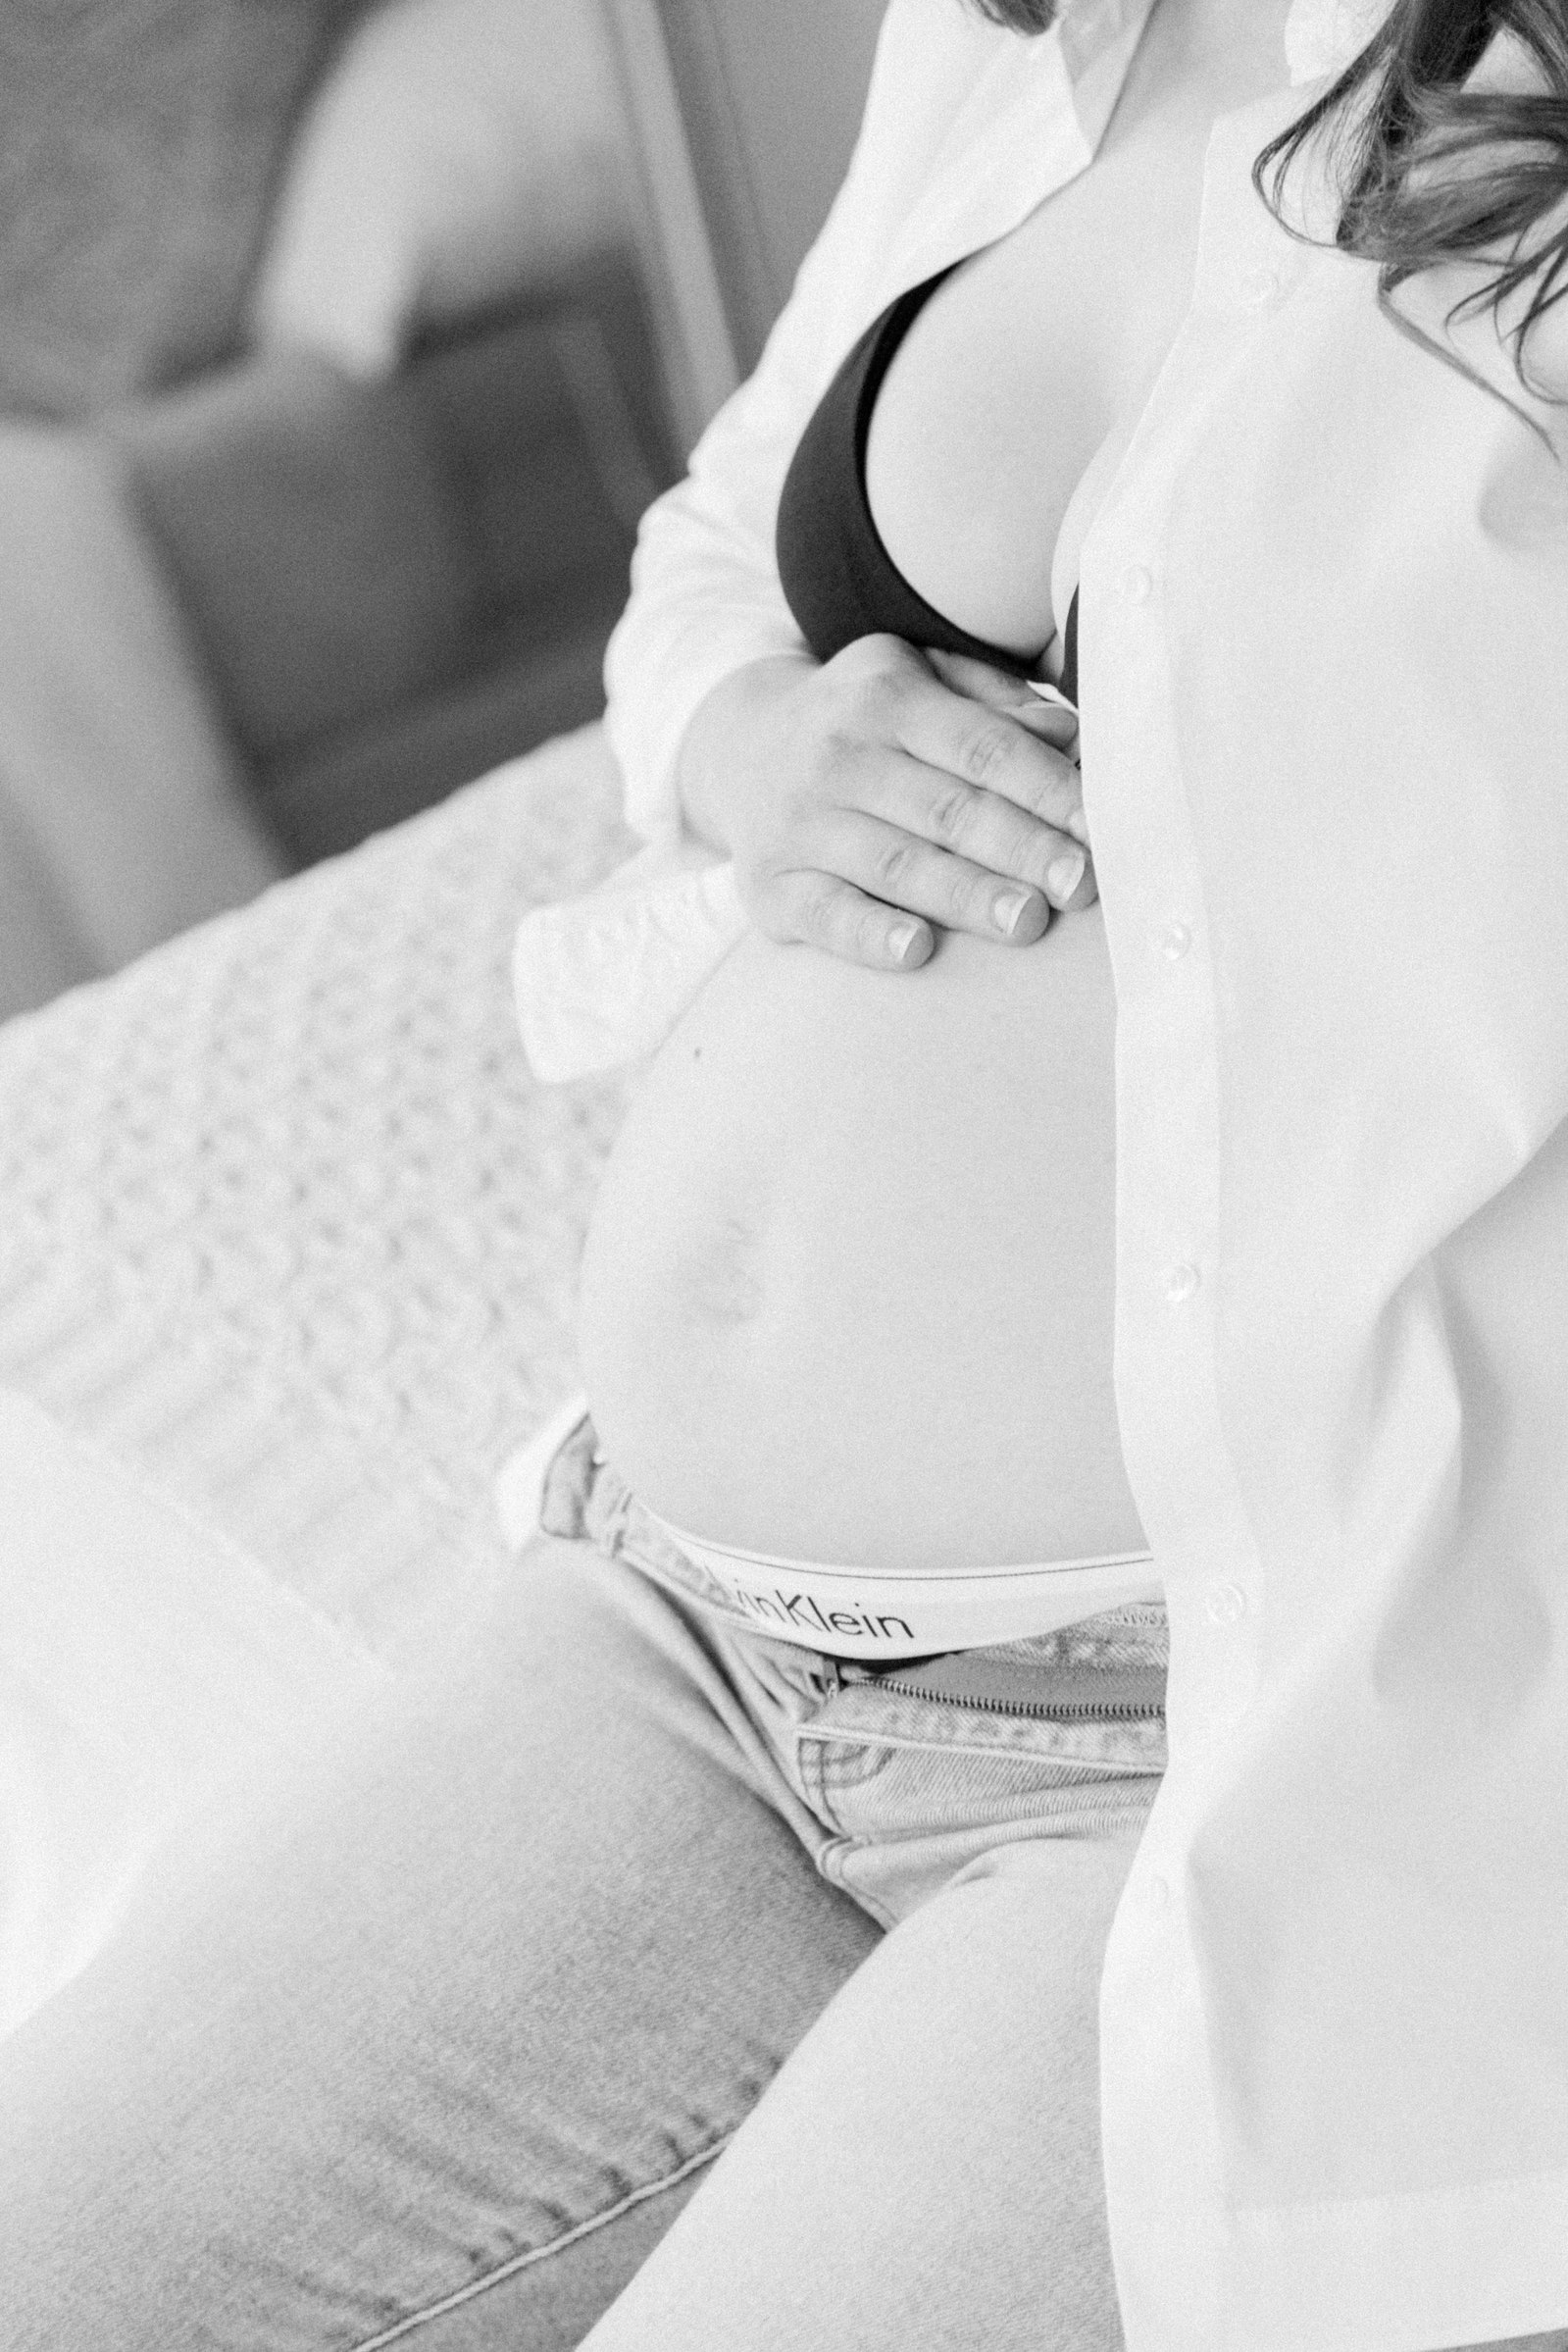 Black & white close up portrait of mom holding her pregnant belly. Portrait photography, family photography, motherhood photography, Niagara photographer, Niagara family photography, Vankleek Hill family photography. Emily VanderBeek Photo